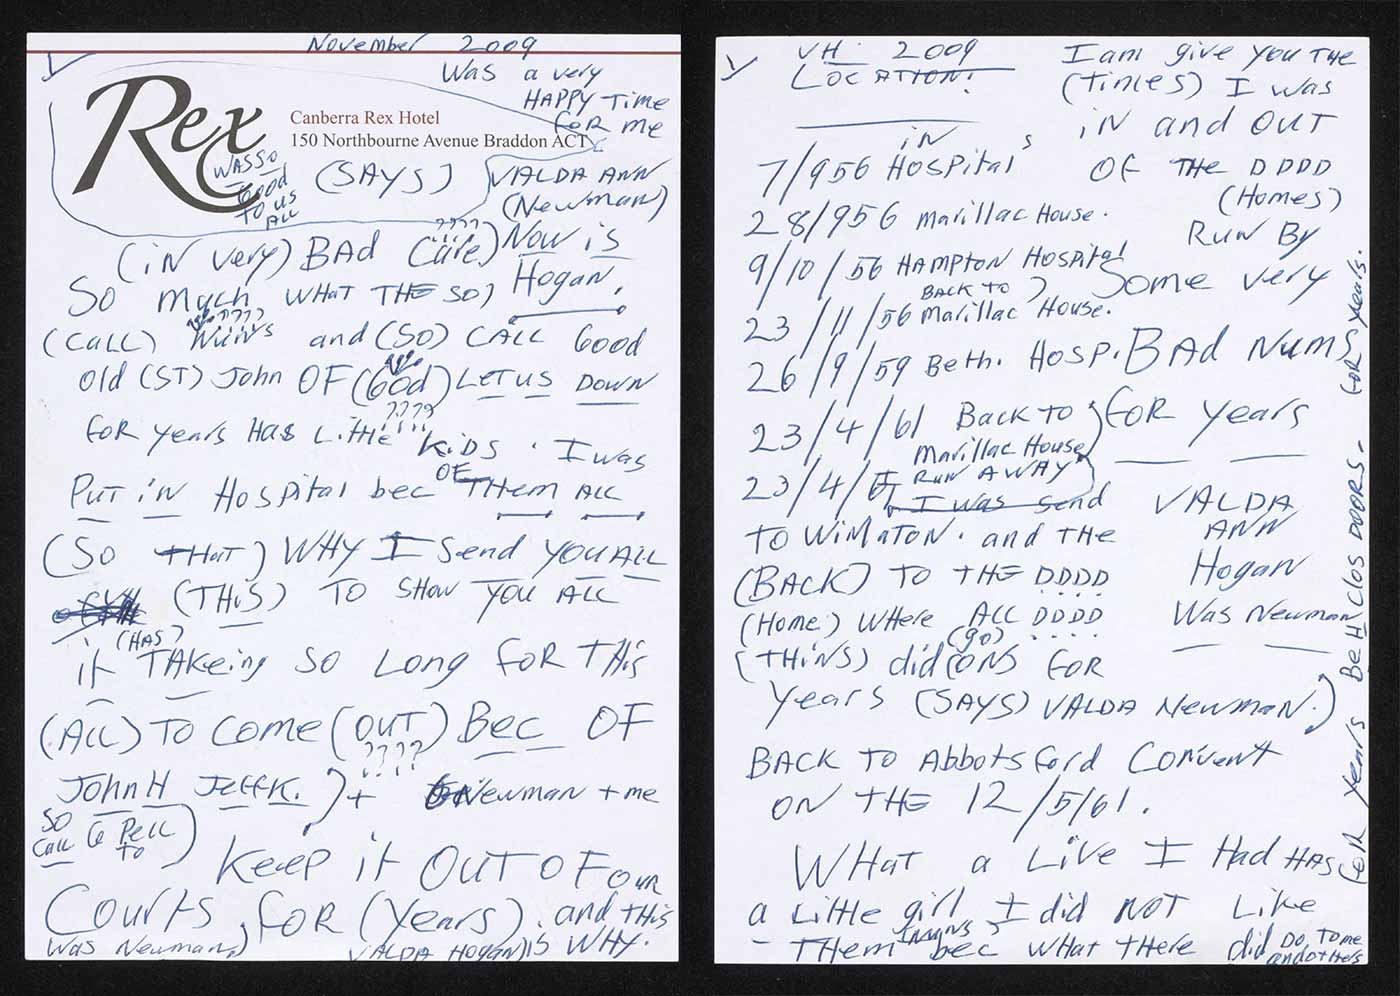 Two sheets of white notepaper, side by side, covered with handwriting in blue pen. 'Rex, Canberra Rex Hotel, 150 Northbourne Avenue Braddon ACT' is printed at the top of the left sheet. Inscriptions on the left read: 'Novermber 2009 / was a very / HAPPY Time / foR me / VALDA ANN / (Newman) / Now is / Hogan. (iN very) BAd Care) / So much WHaT THE SO / (caLL) nuns and (so) CALL Good / old (ST) John OF (God) Let us DOWN / foR years Has Little KiDS. I was / PUT iN Hospital bec OF THem ALL / (So THaT) WHY I Send you ALL / (THiS) TO SHow you ALL / it (HAS) TAKeing SO Long fOR THis / (ALL) TO come (OUT) Bec OF / John H Jeffk. + [G] Newman + me / so calL [CE] PelL to / Keep it OuT oF OuR / Courts FOR (years). and THis / is WHY. Was Newman, VALDA Hogan)'. The reverse side partially reads 'I am give you THe / (times) I was / iN and OuT / of THe DDDD / (Homes) RuN By / Some very / BAd Nu[m]s / FOR years'. The right reads: 'TO COME'. - click to view larger image